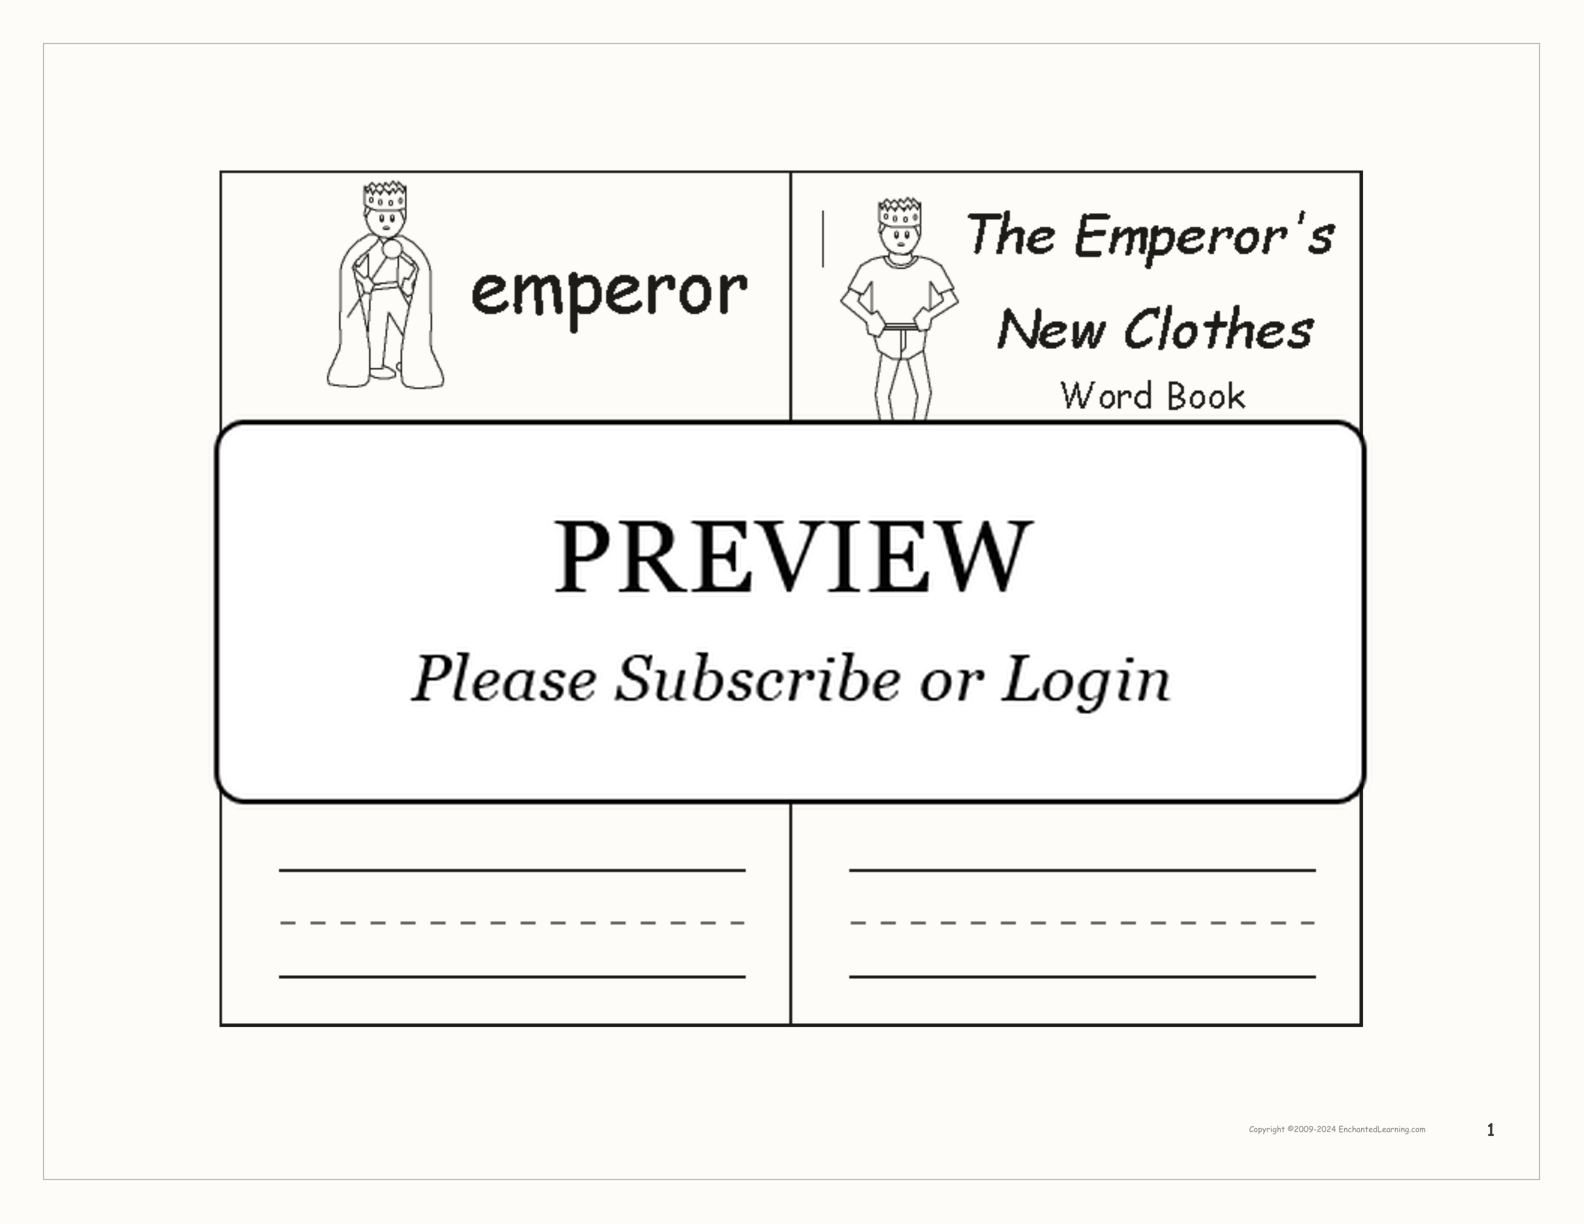 'The Emperor's New Clothes' Word Book interactive printout page 1